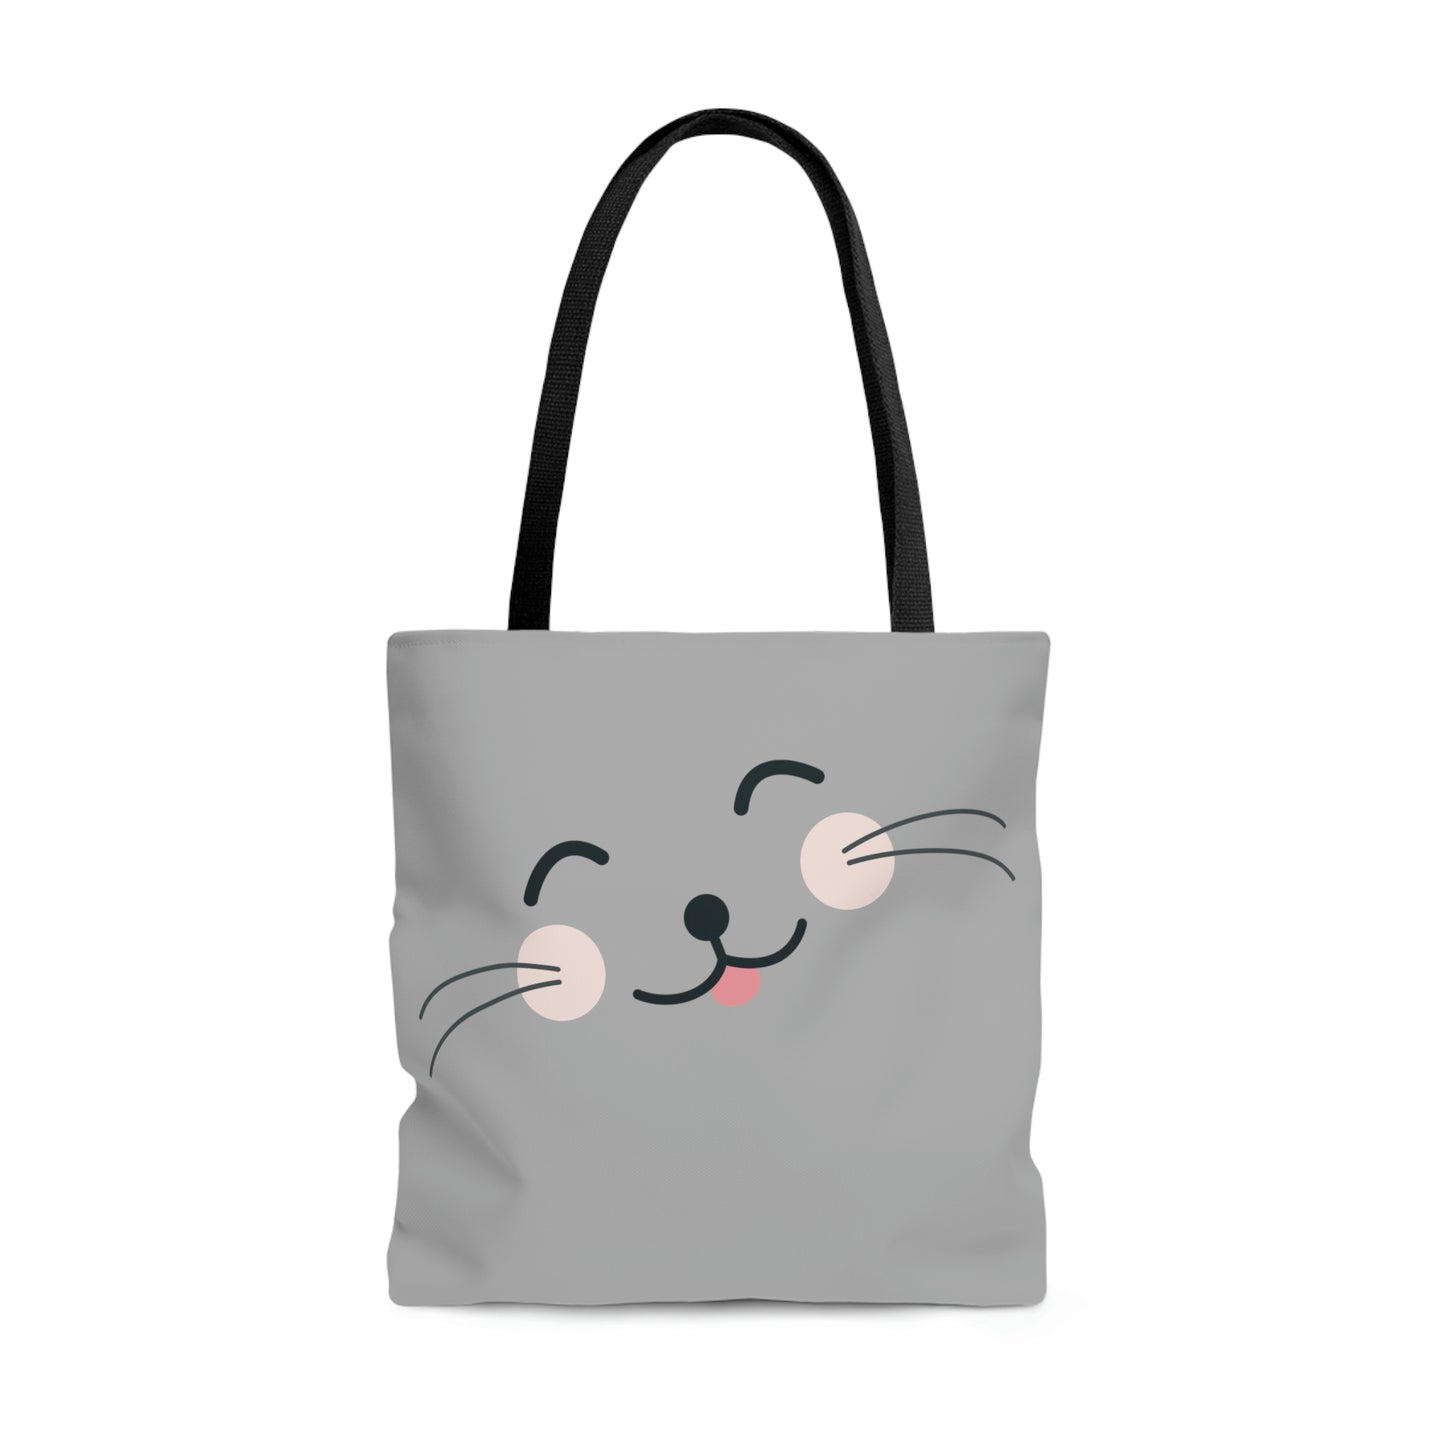 Front of tote bag - all sizes